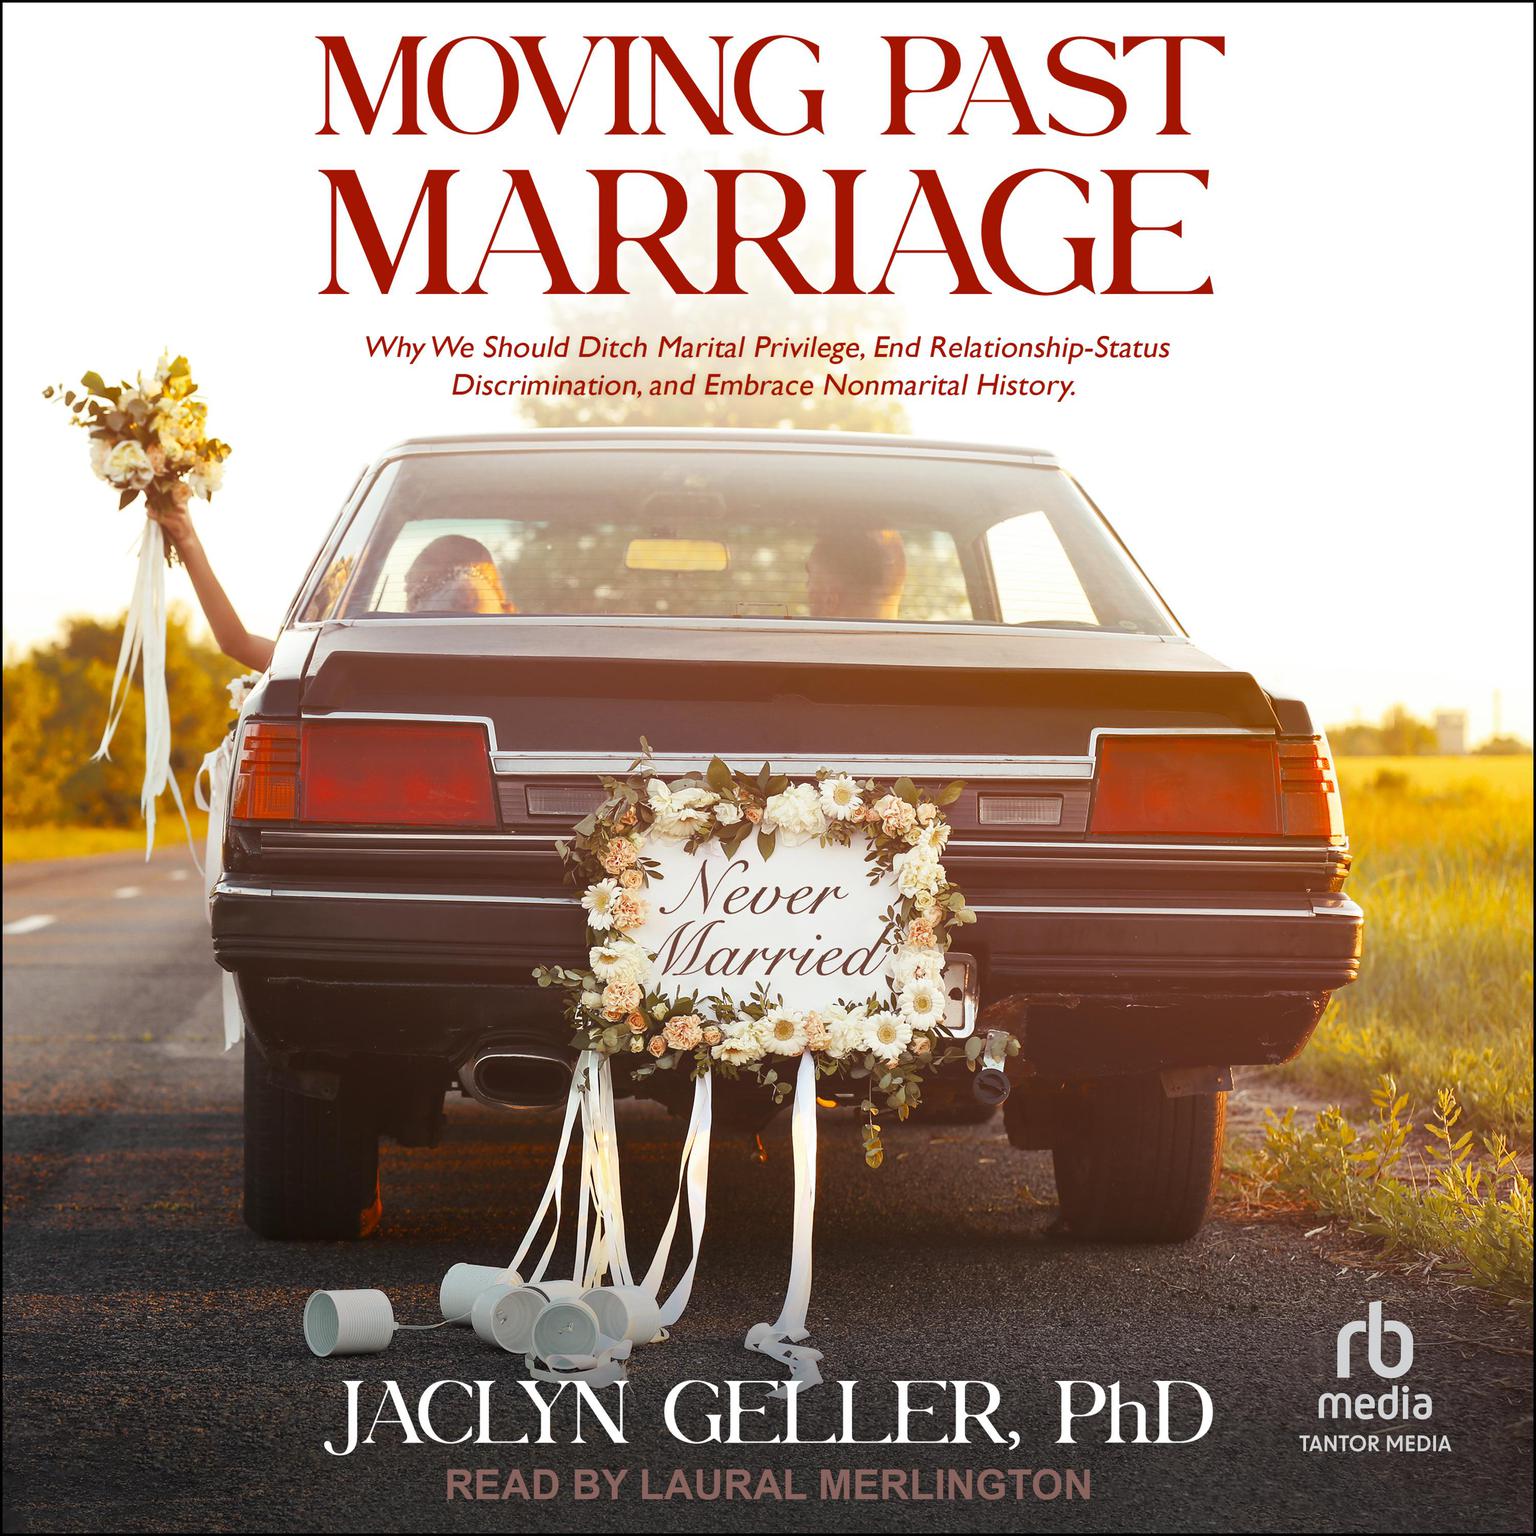 Moving Past Marriage: Why We Should Ditch Marital Privilege, End Relationship-Status Discrimination, and Embrace Non-marital History Audiobook, by Jaclyn Geller